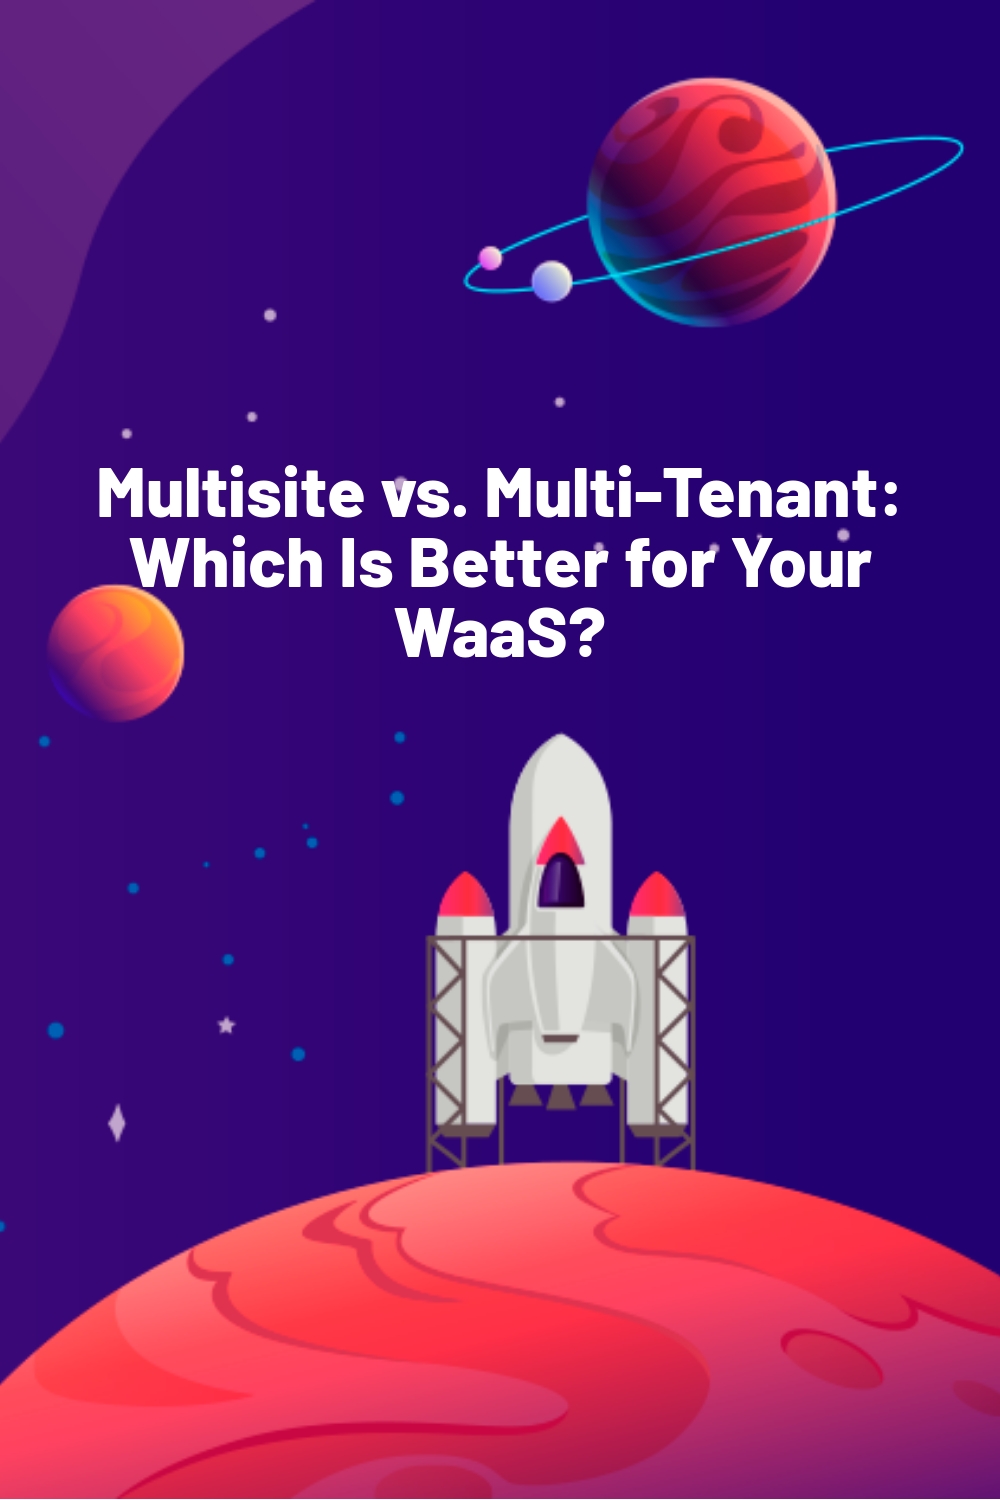 Multisite vs. Multi-Tenant: Which Is Better for Your WaaS?